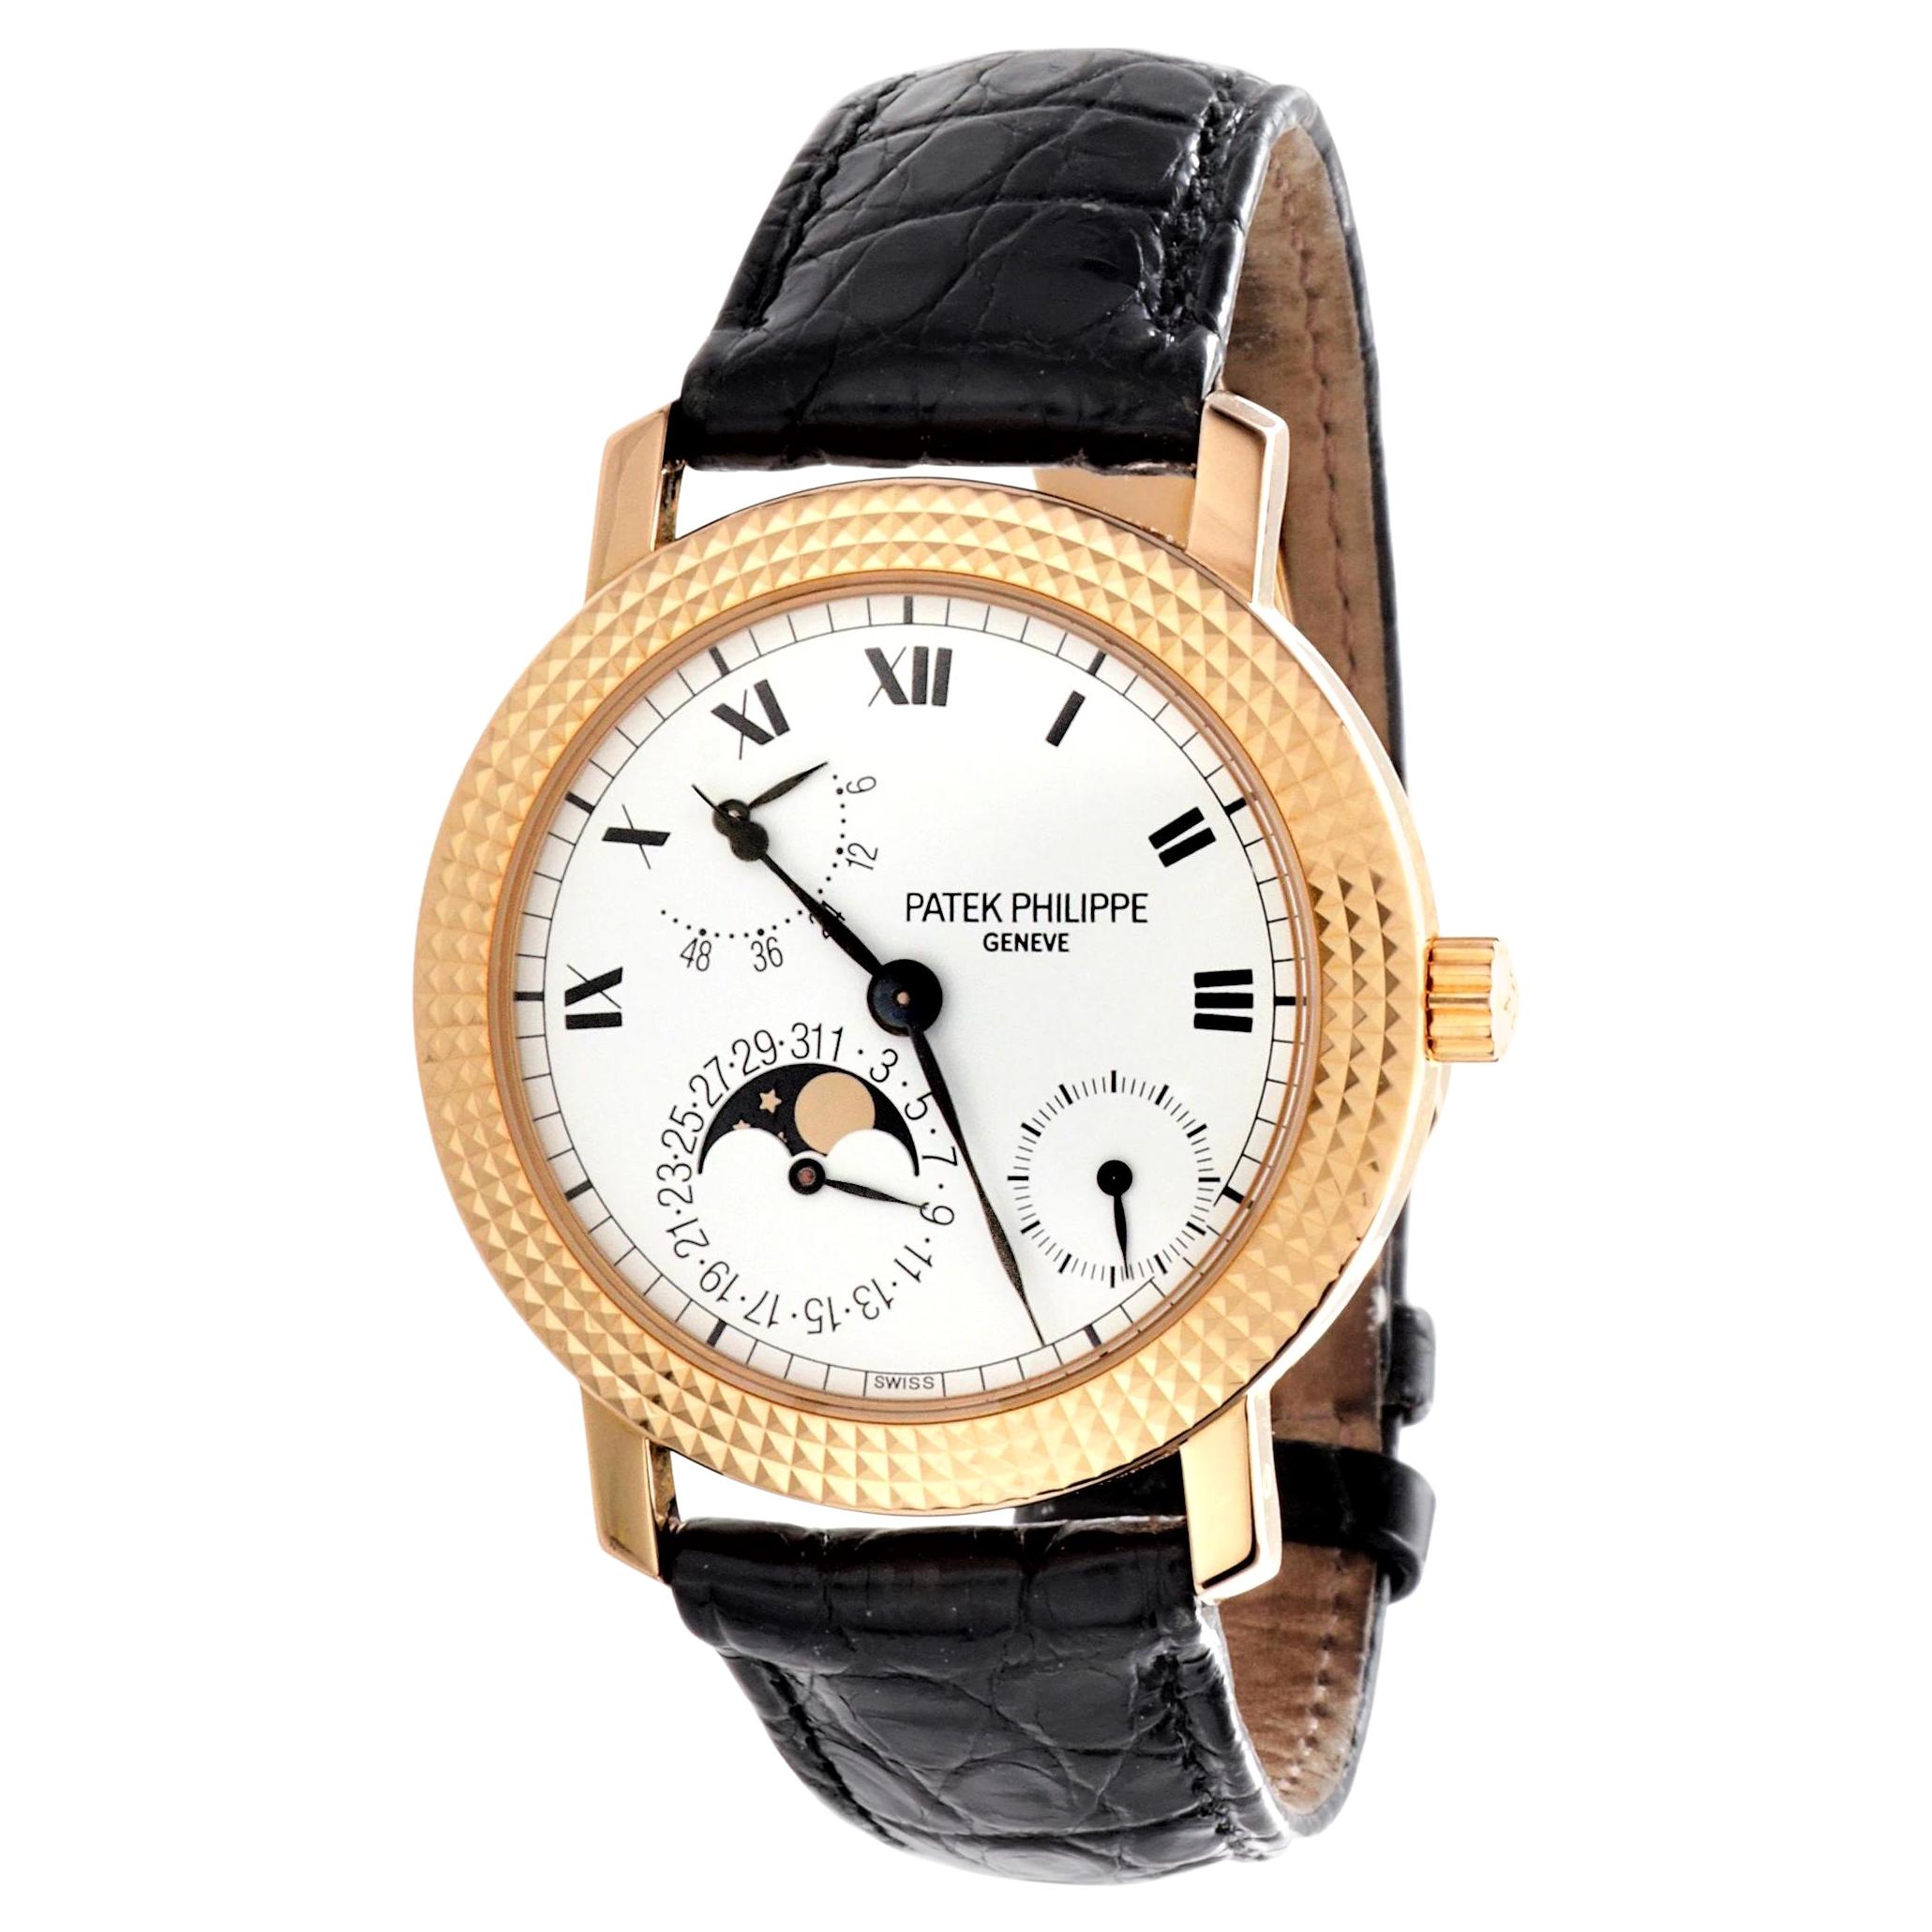 Patek Philippe 5057R 25th Anniversary Jubilee Limited Edition Watch, circa 1997